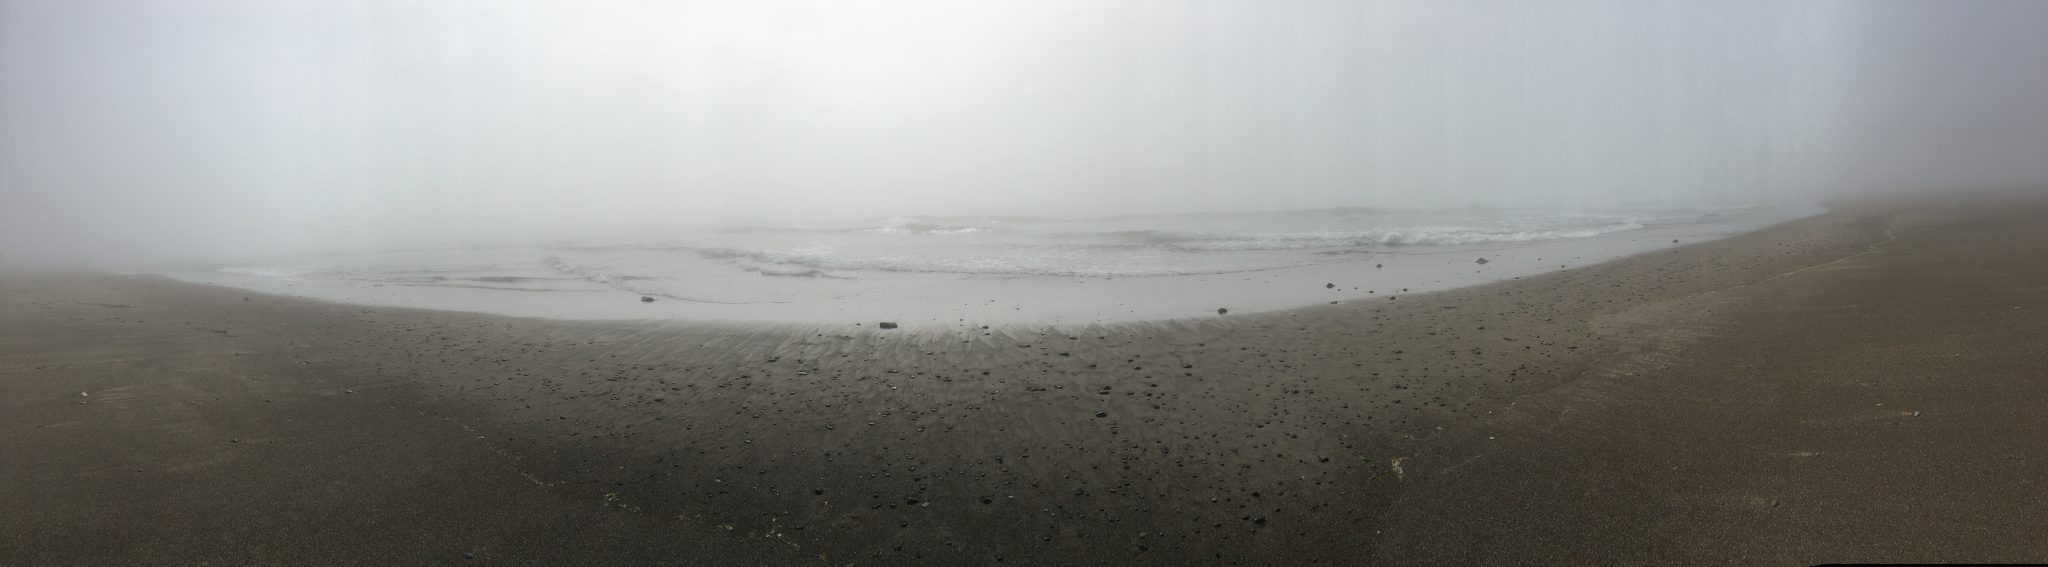 Foggy day on the beach in Lincoln City